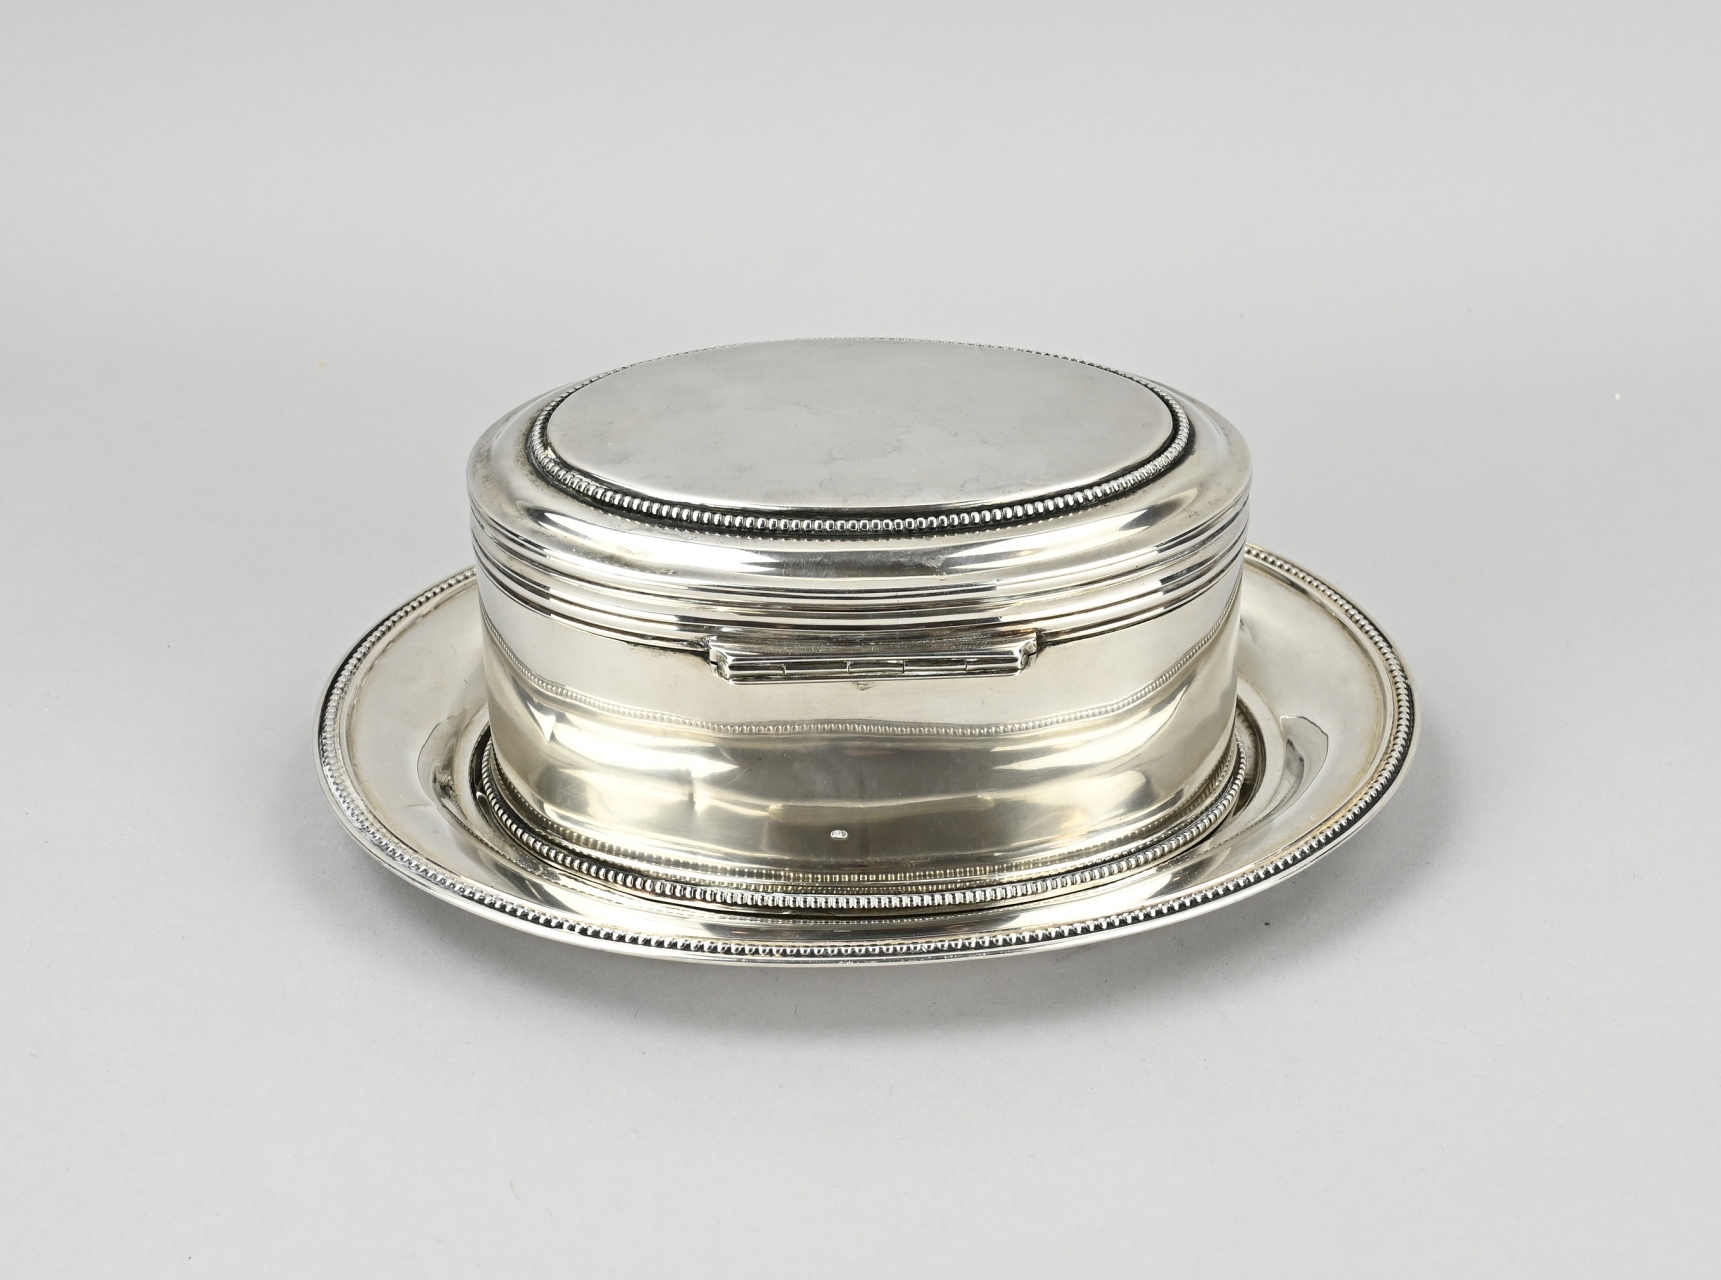 Silver cookie jar on saucer - Image 2 of 2